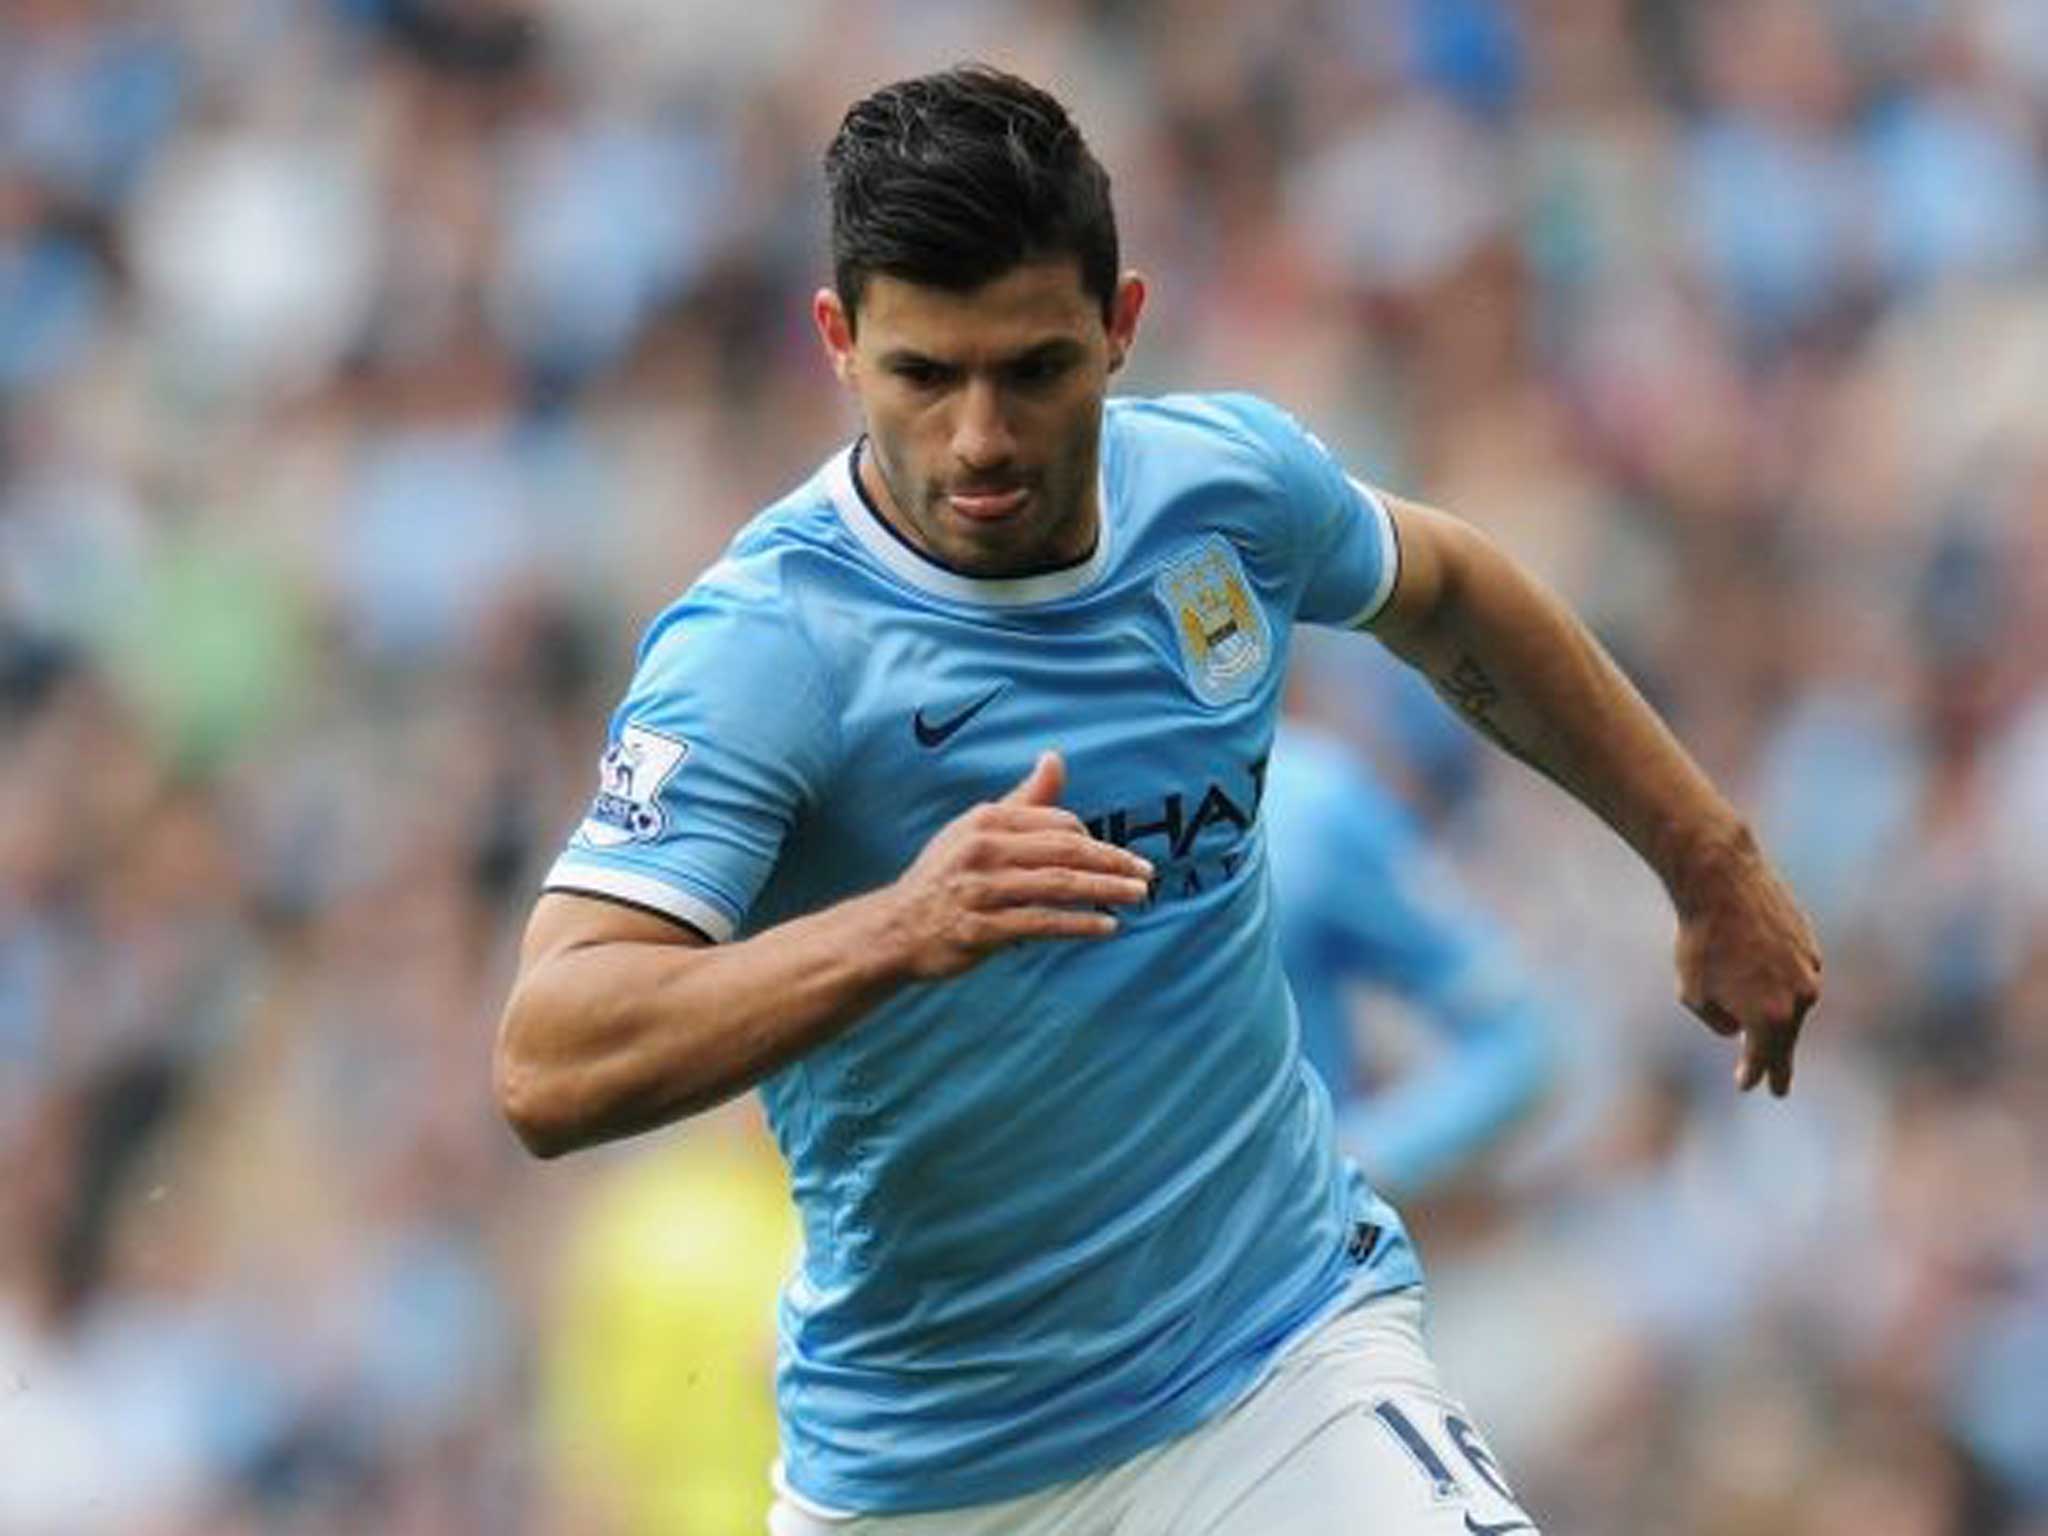 Ordinarily Pellegrini would like to ease Aguero back into action after a month out, but this may not be an option